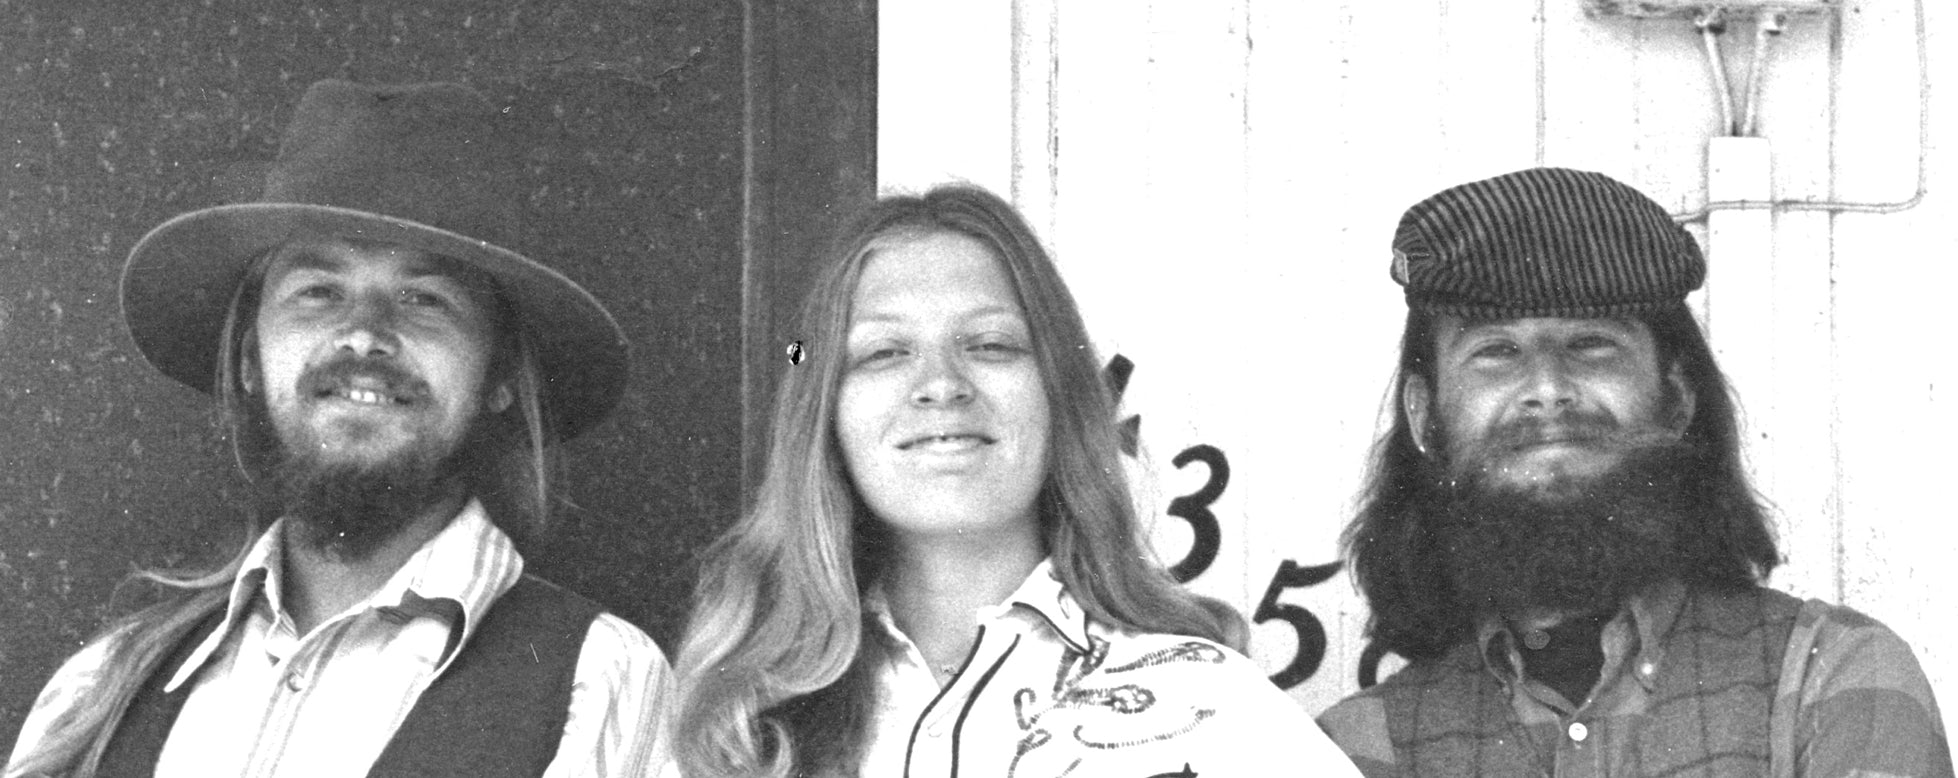 Photo of Dave Brown, Pamela Ostergren, and Ryan Thomson, members of the Chicken Cheek Tweakers old time string band, in La Mesa, California, 1974.